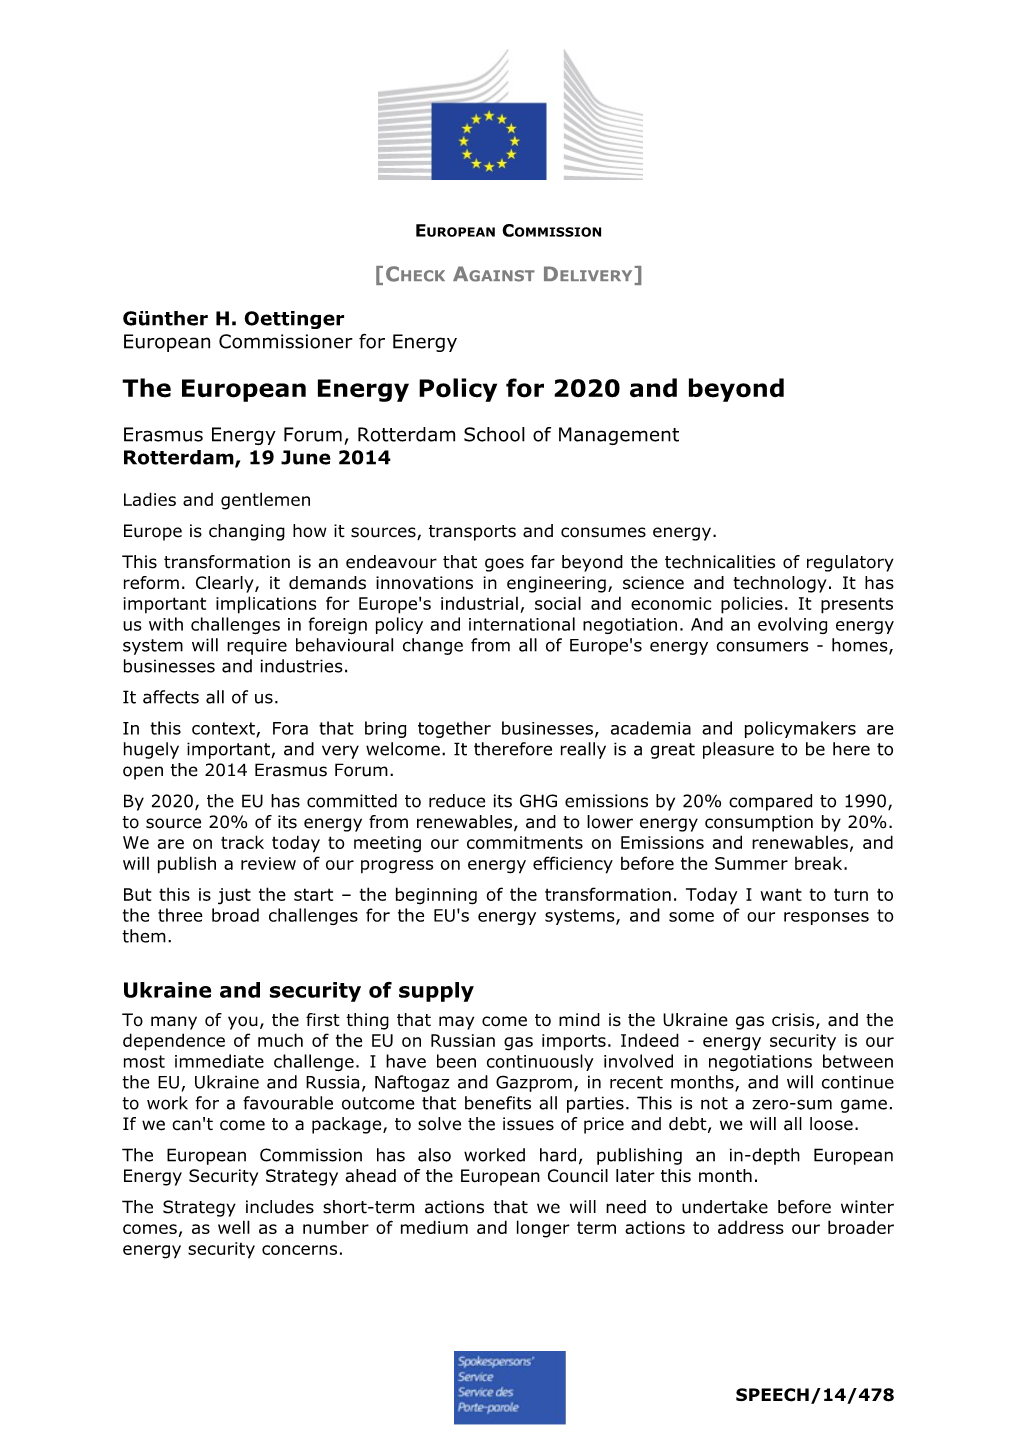 The European Energy Policy for 2020 and Beyond